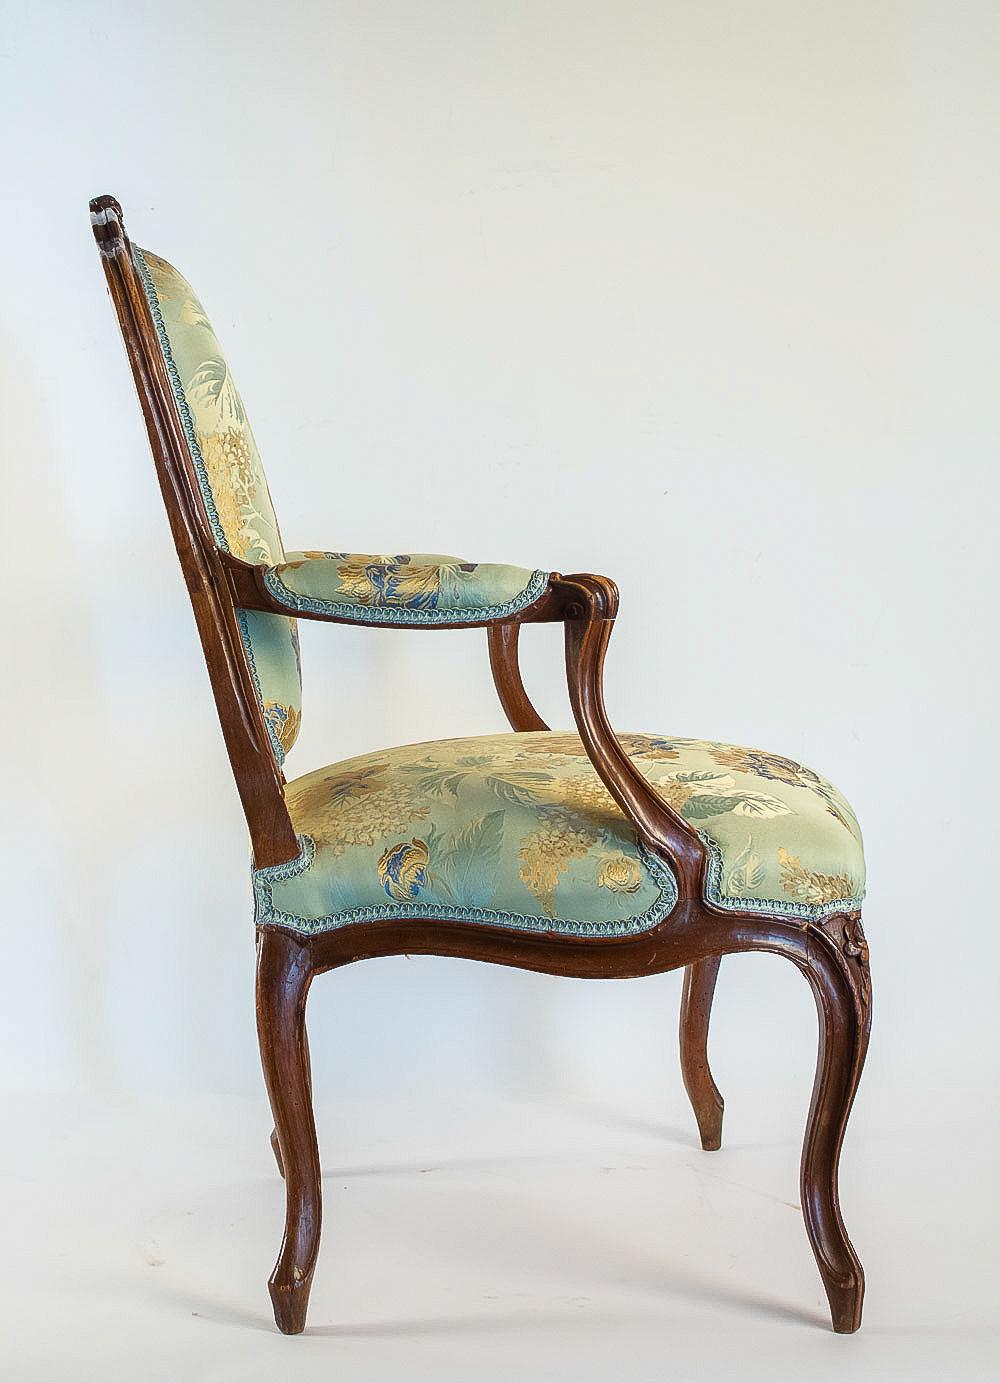 Hand-Carved Stamped by Louis Delanois Louis XV Period Pair of Large Armchairs, circa 1765